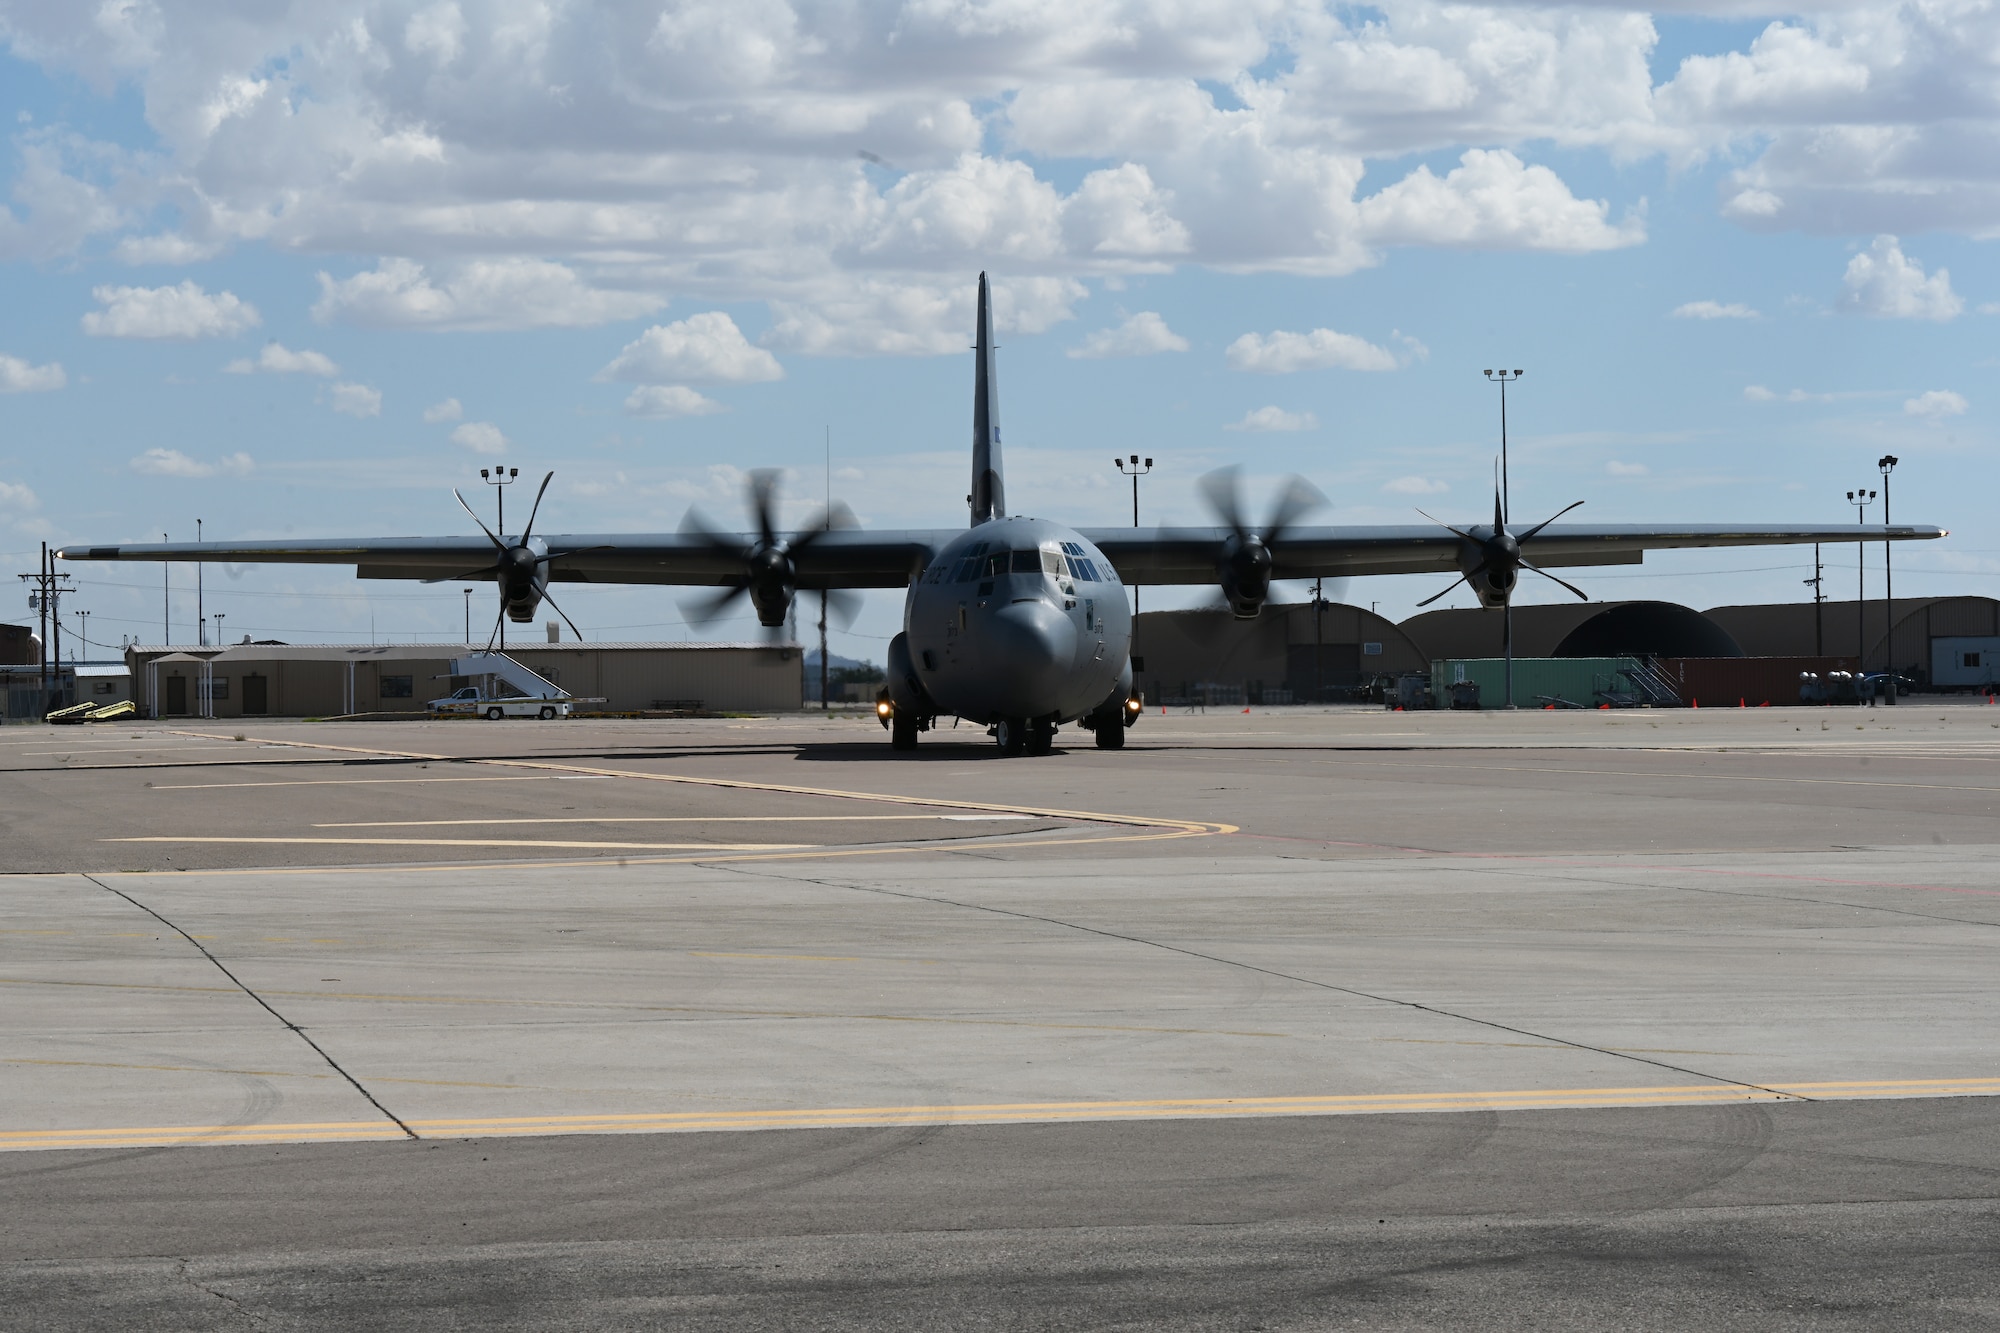 A U.S. Air Force Lockheed C-130 Hercules taxis after landing in support of Department of State-led Operation Allies Welcome, Aug. 31, 2021, on Holloman Air Force Base, New Mexico. The Department of Defense, through U.S. Northern Command, and in support of the Department of Homeland Security, is providing transportation, temporary housing, medical screening, and general support for up to 50,000 Afghan evacuees at suitable facilities, in permanent or temporary structures, as quickly as possible. This initiative provides Afghan personnel essential support at secure locations outside Afghanistan. (U.S. Air Force photo by Staff Sgt. Christopher S. Sparks)